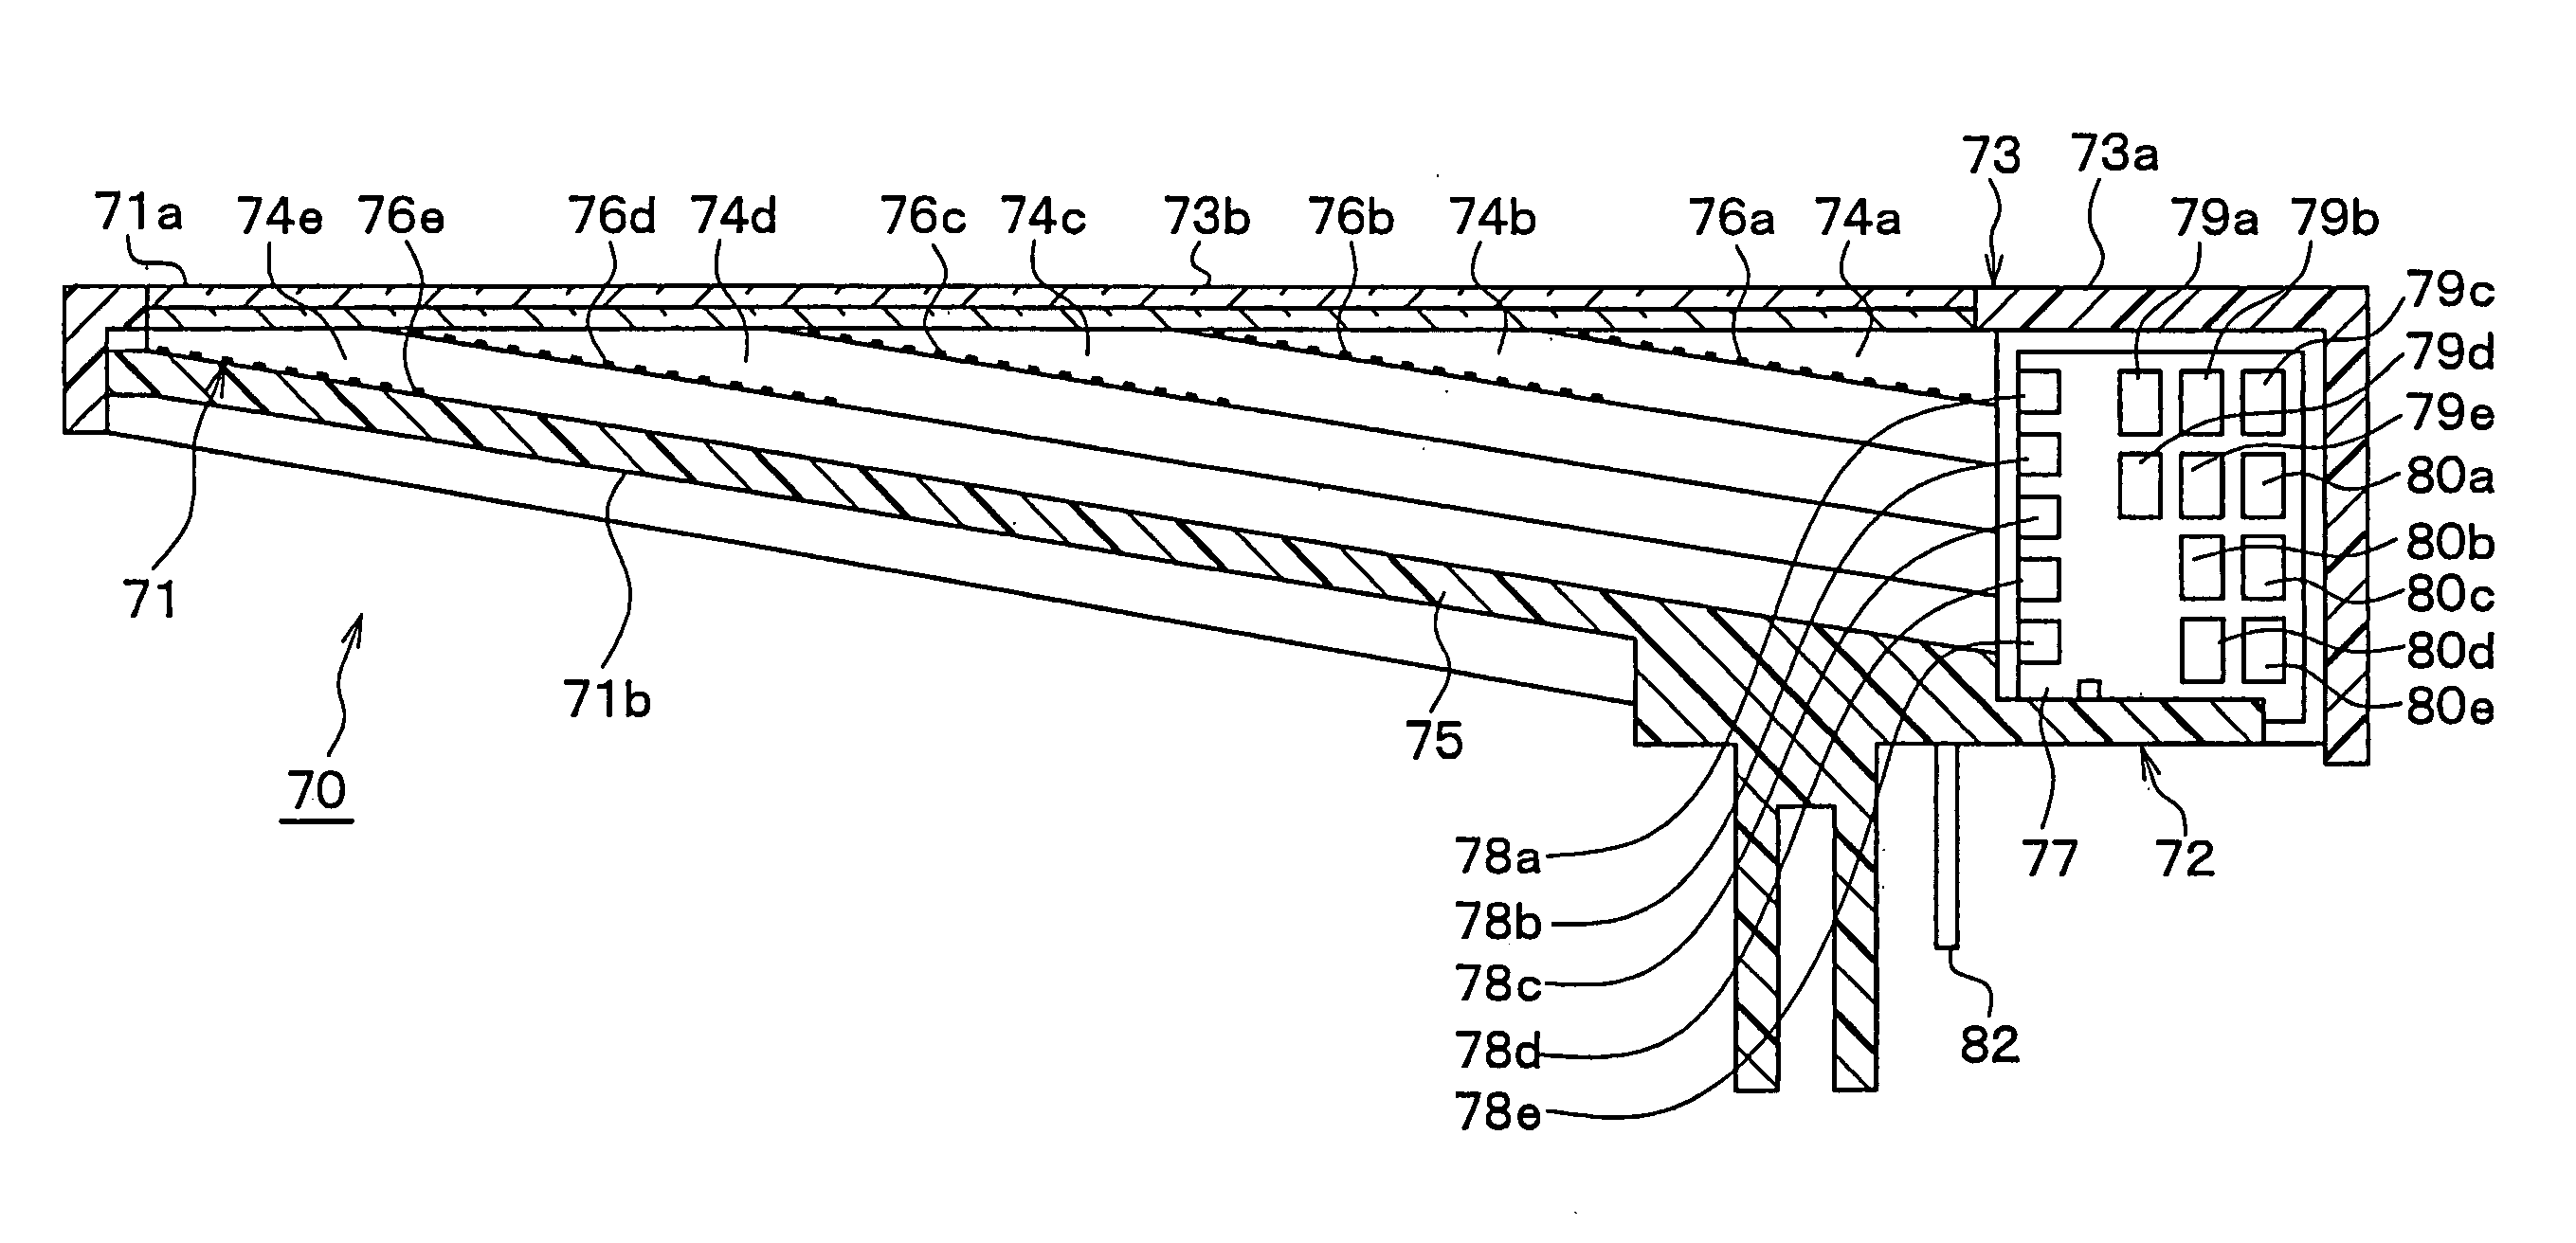 Displaying instrument and luminous pointer